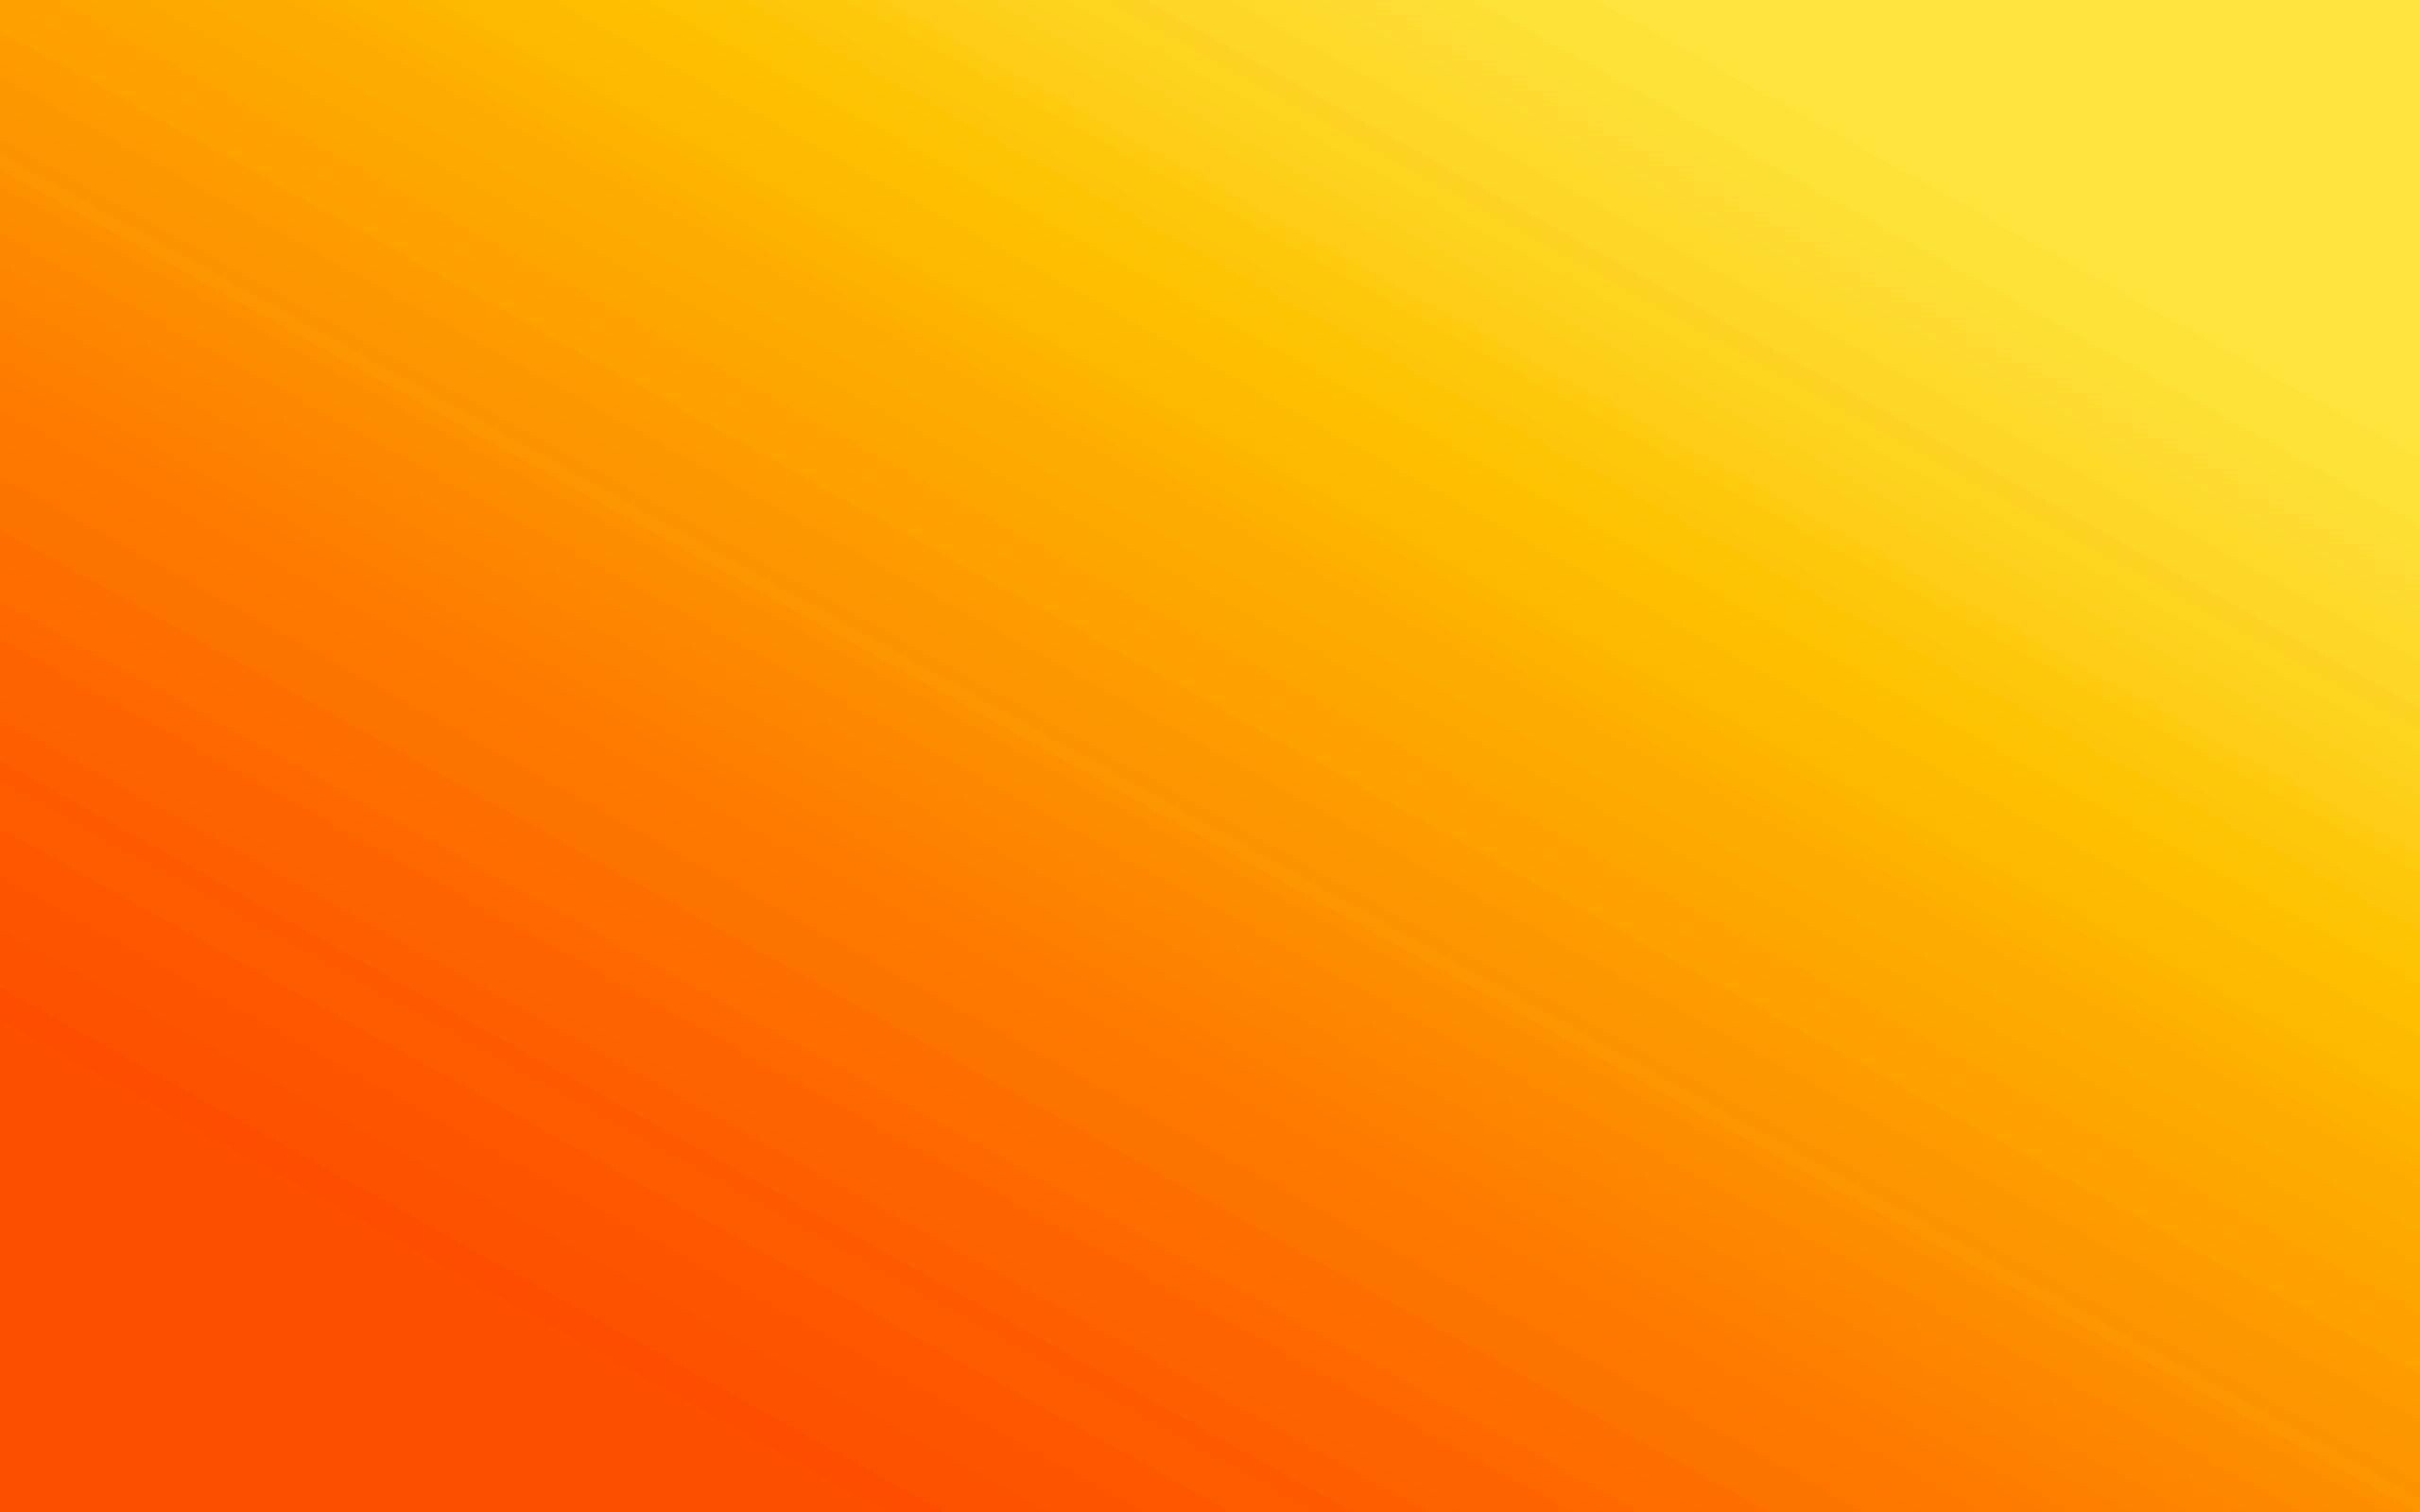 52+ Orange Desktop Wallpapers: HD, 4K, 5K for PC and Mobile | Download free  images for iPhone, Android